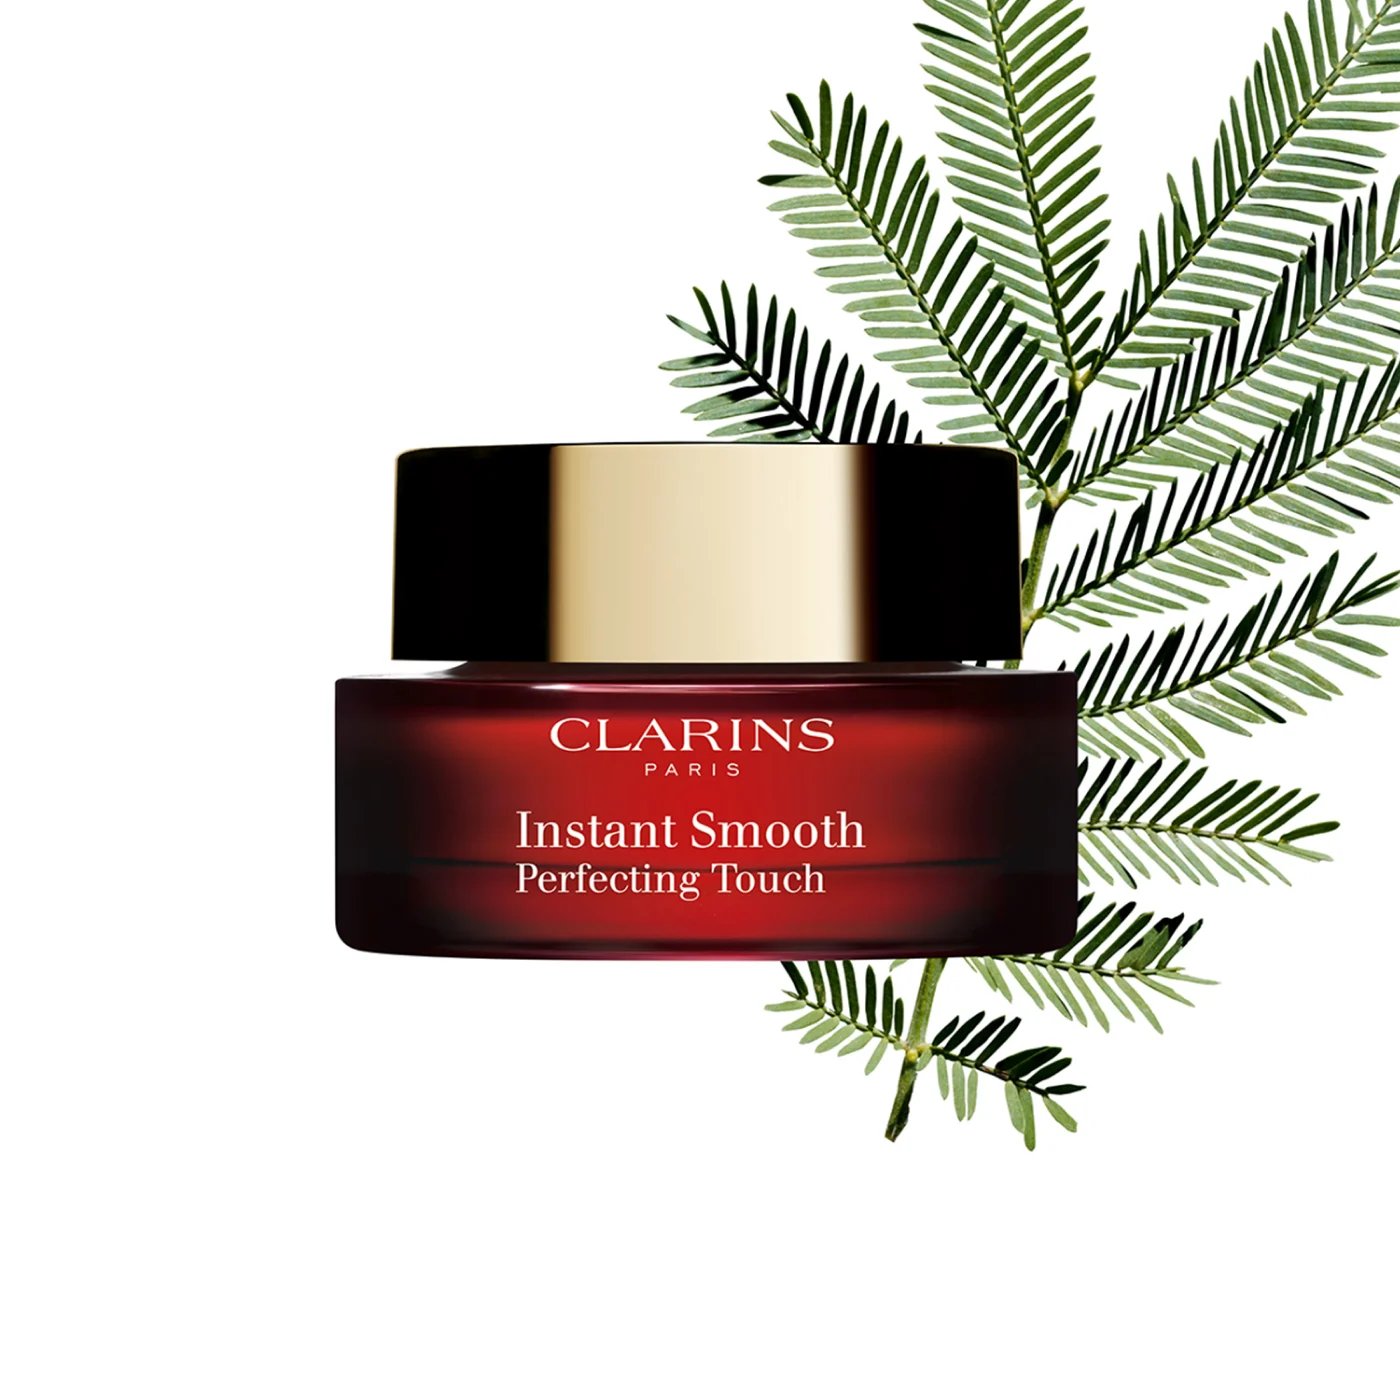 Image of Clarins – Instant Smooth Perfecting Touch Primer